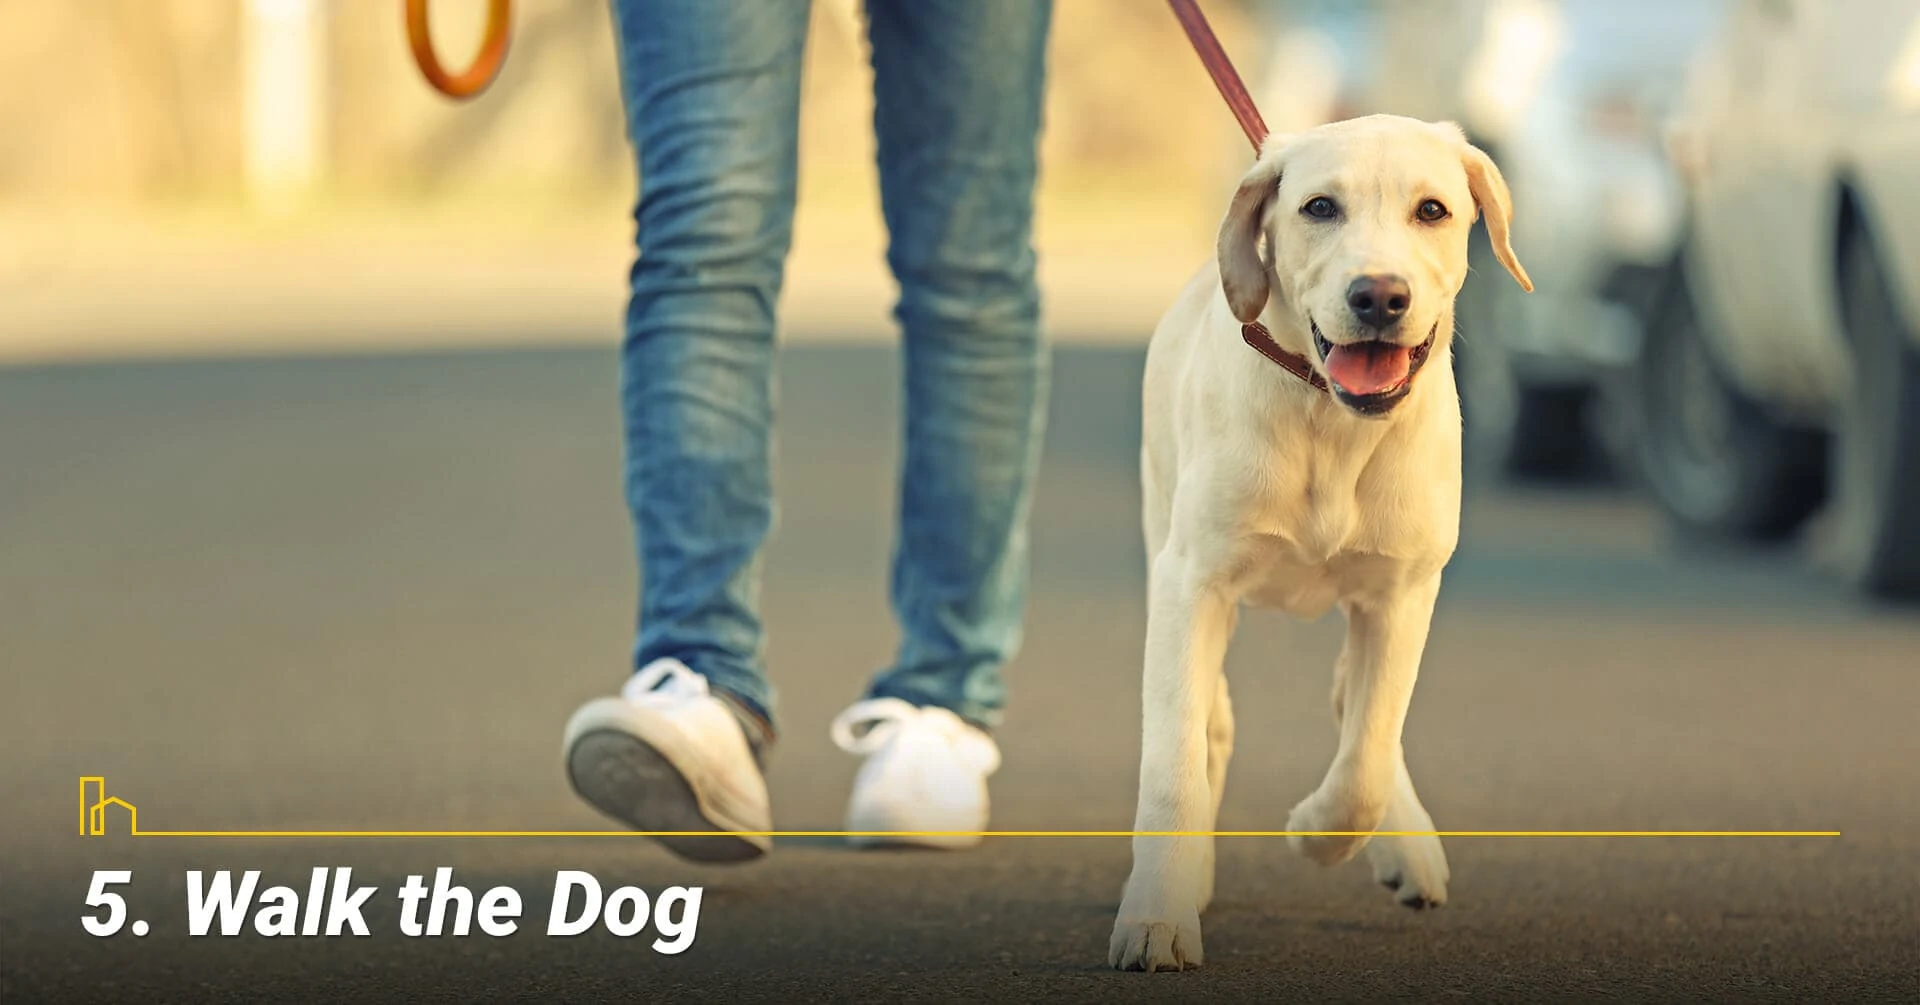 Walk the Dog, exercise with your pet